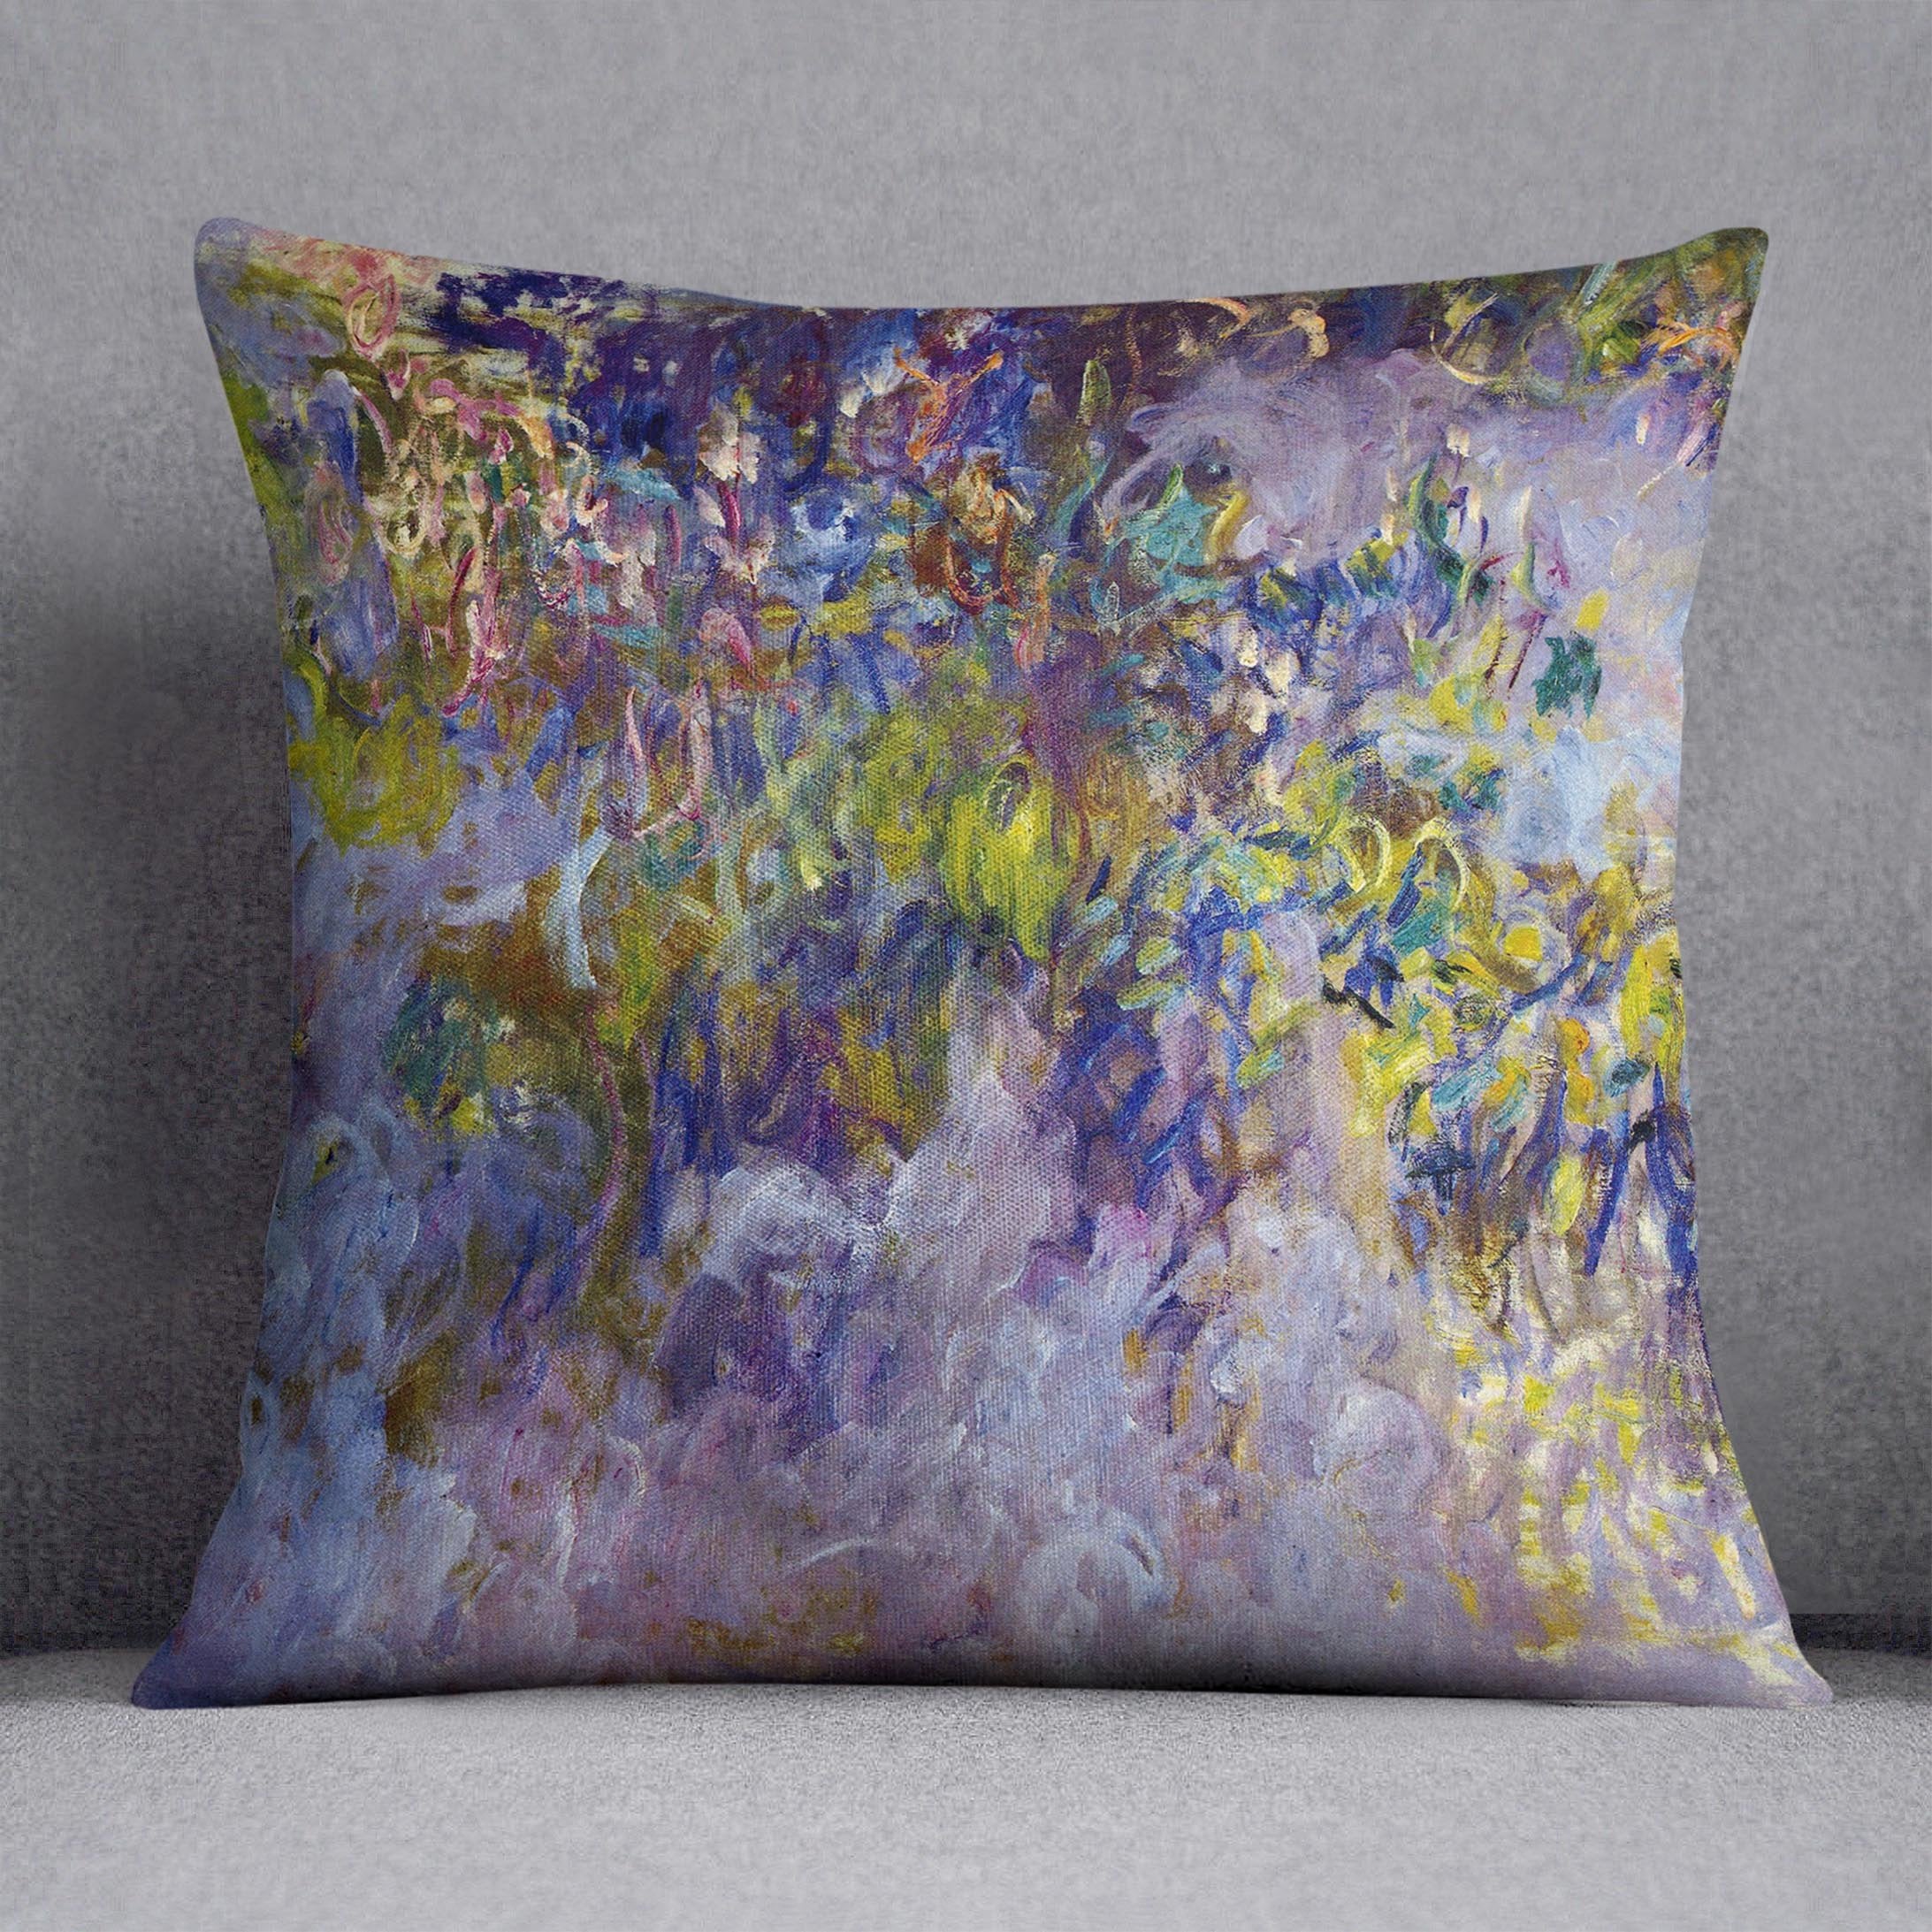 Wisteria 1 by Monet Throw Pillow